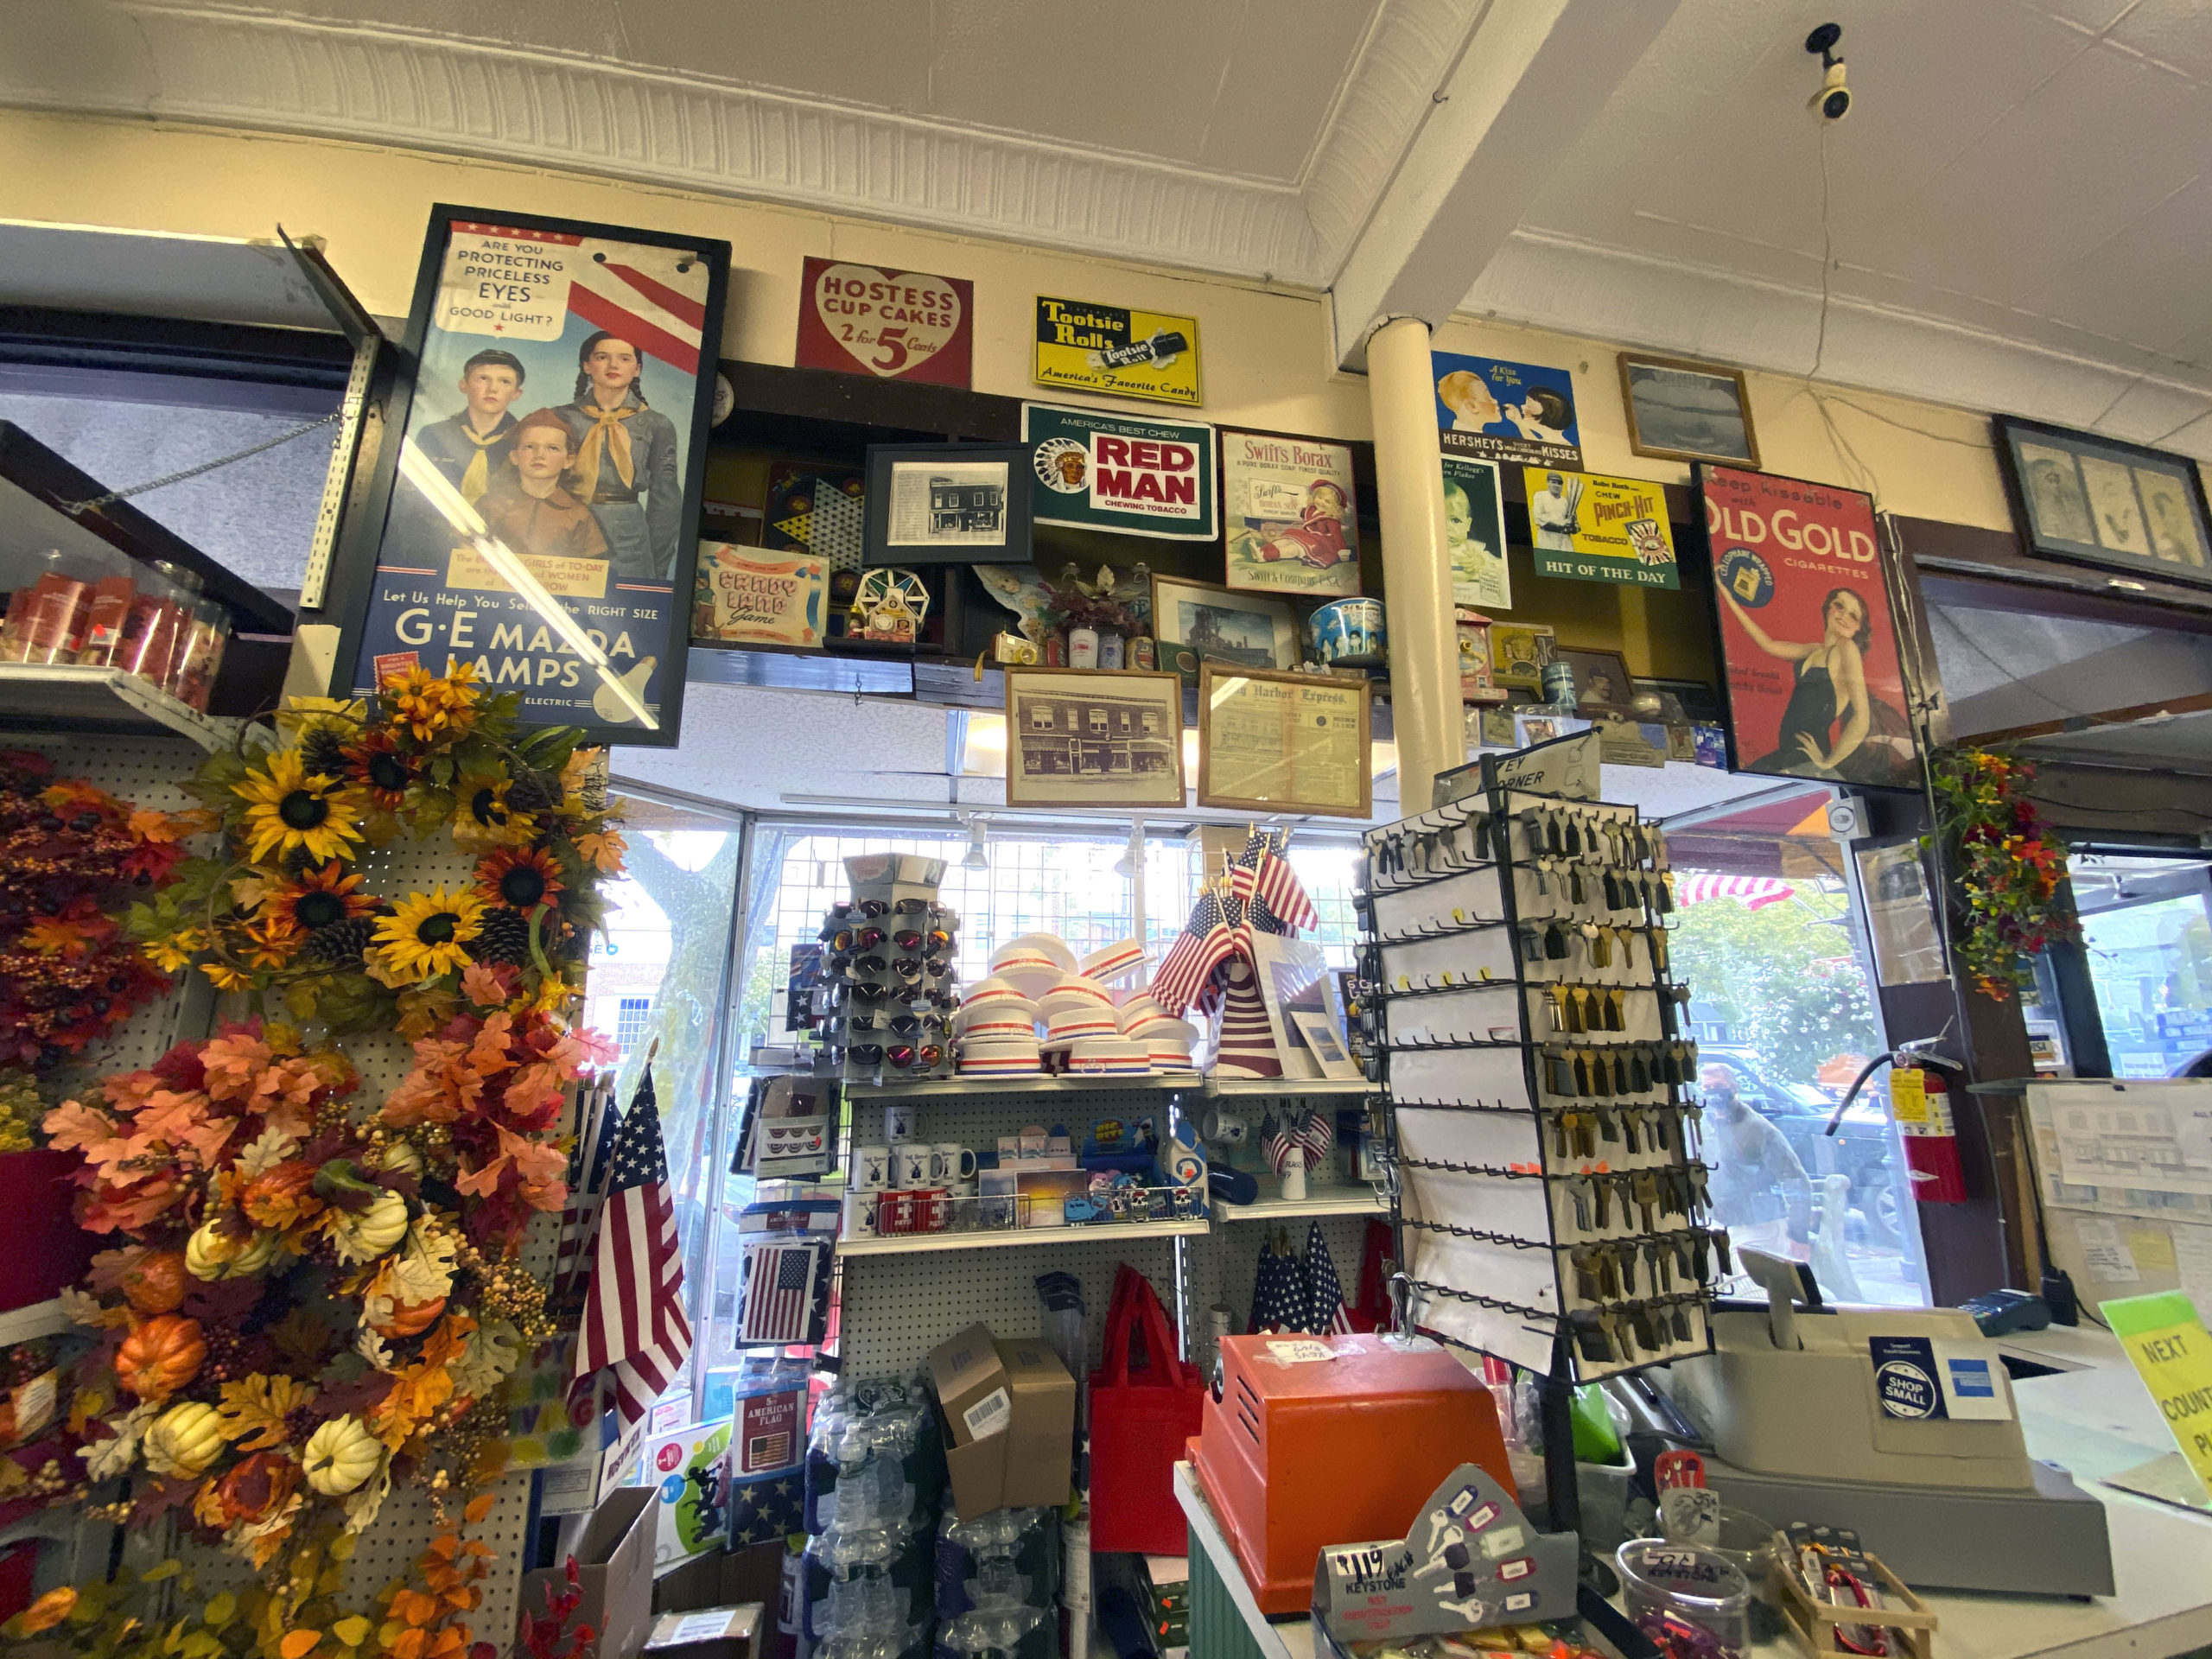 The Sag Harbor Variety Store is celebrating 50 years under the current ownership.  DANA SHAW